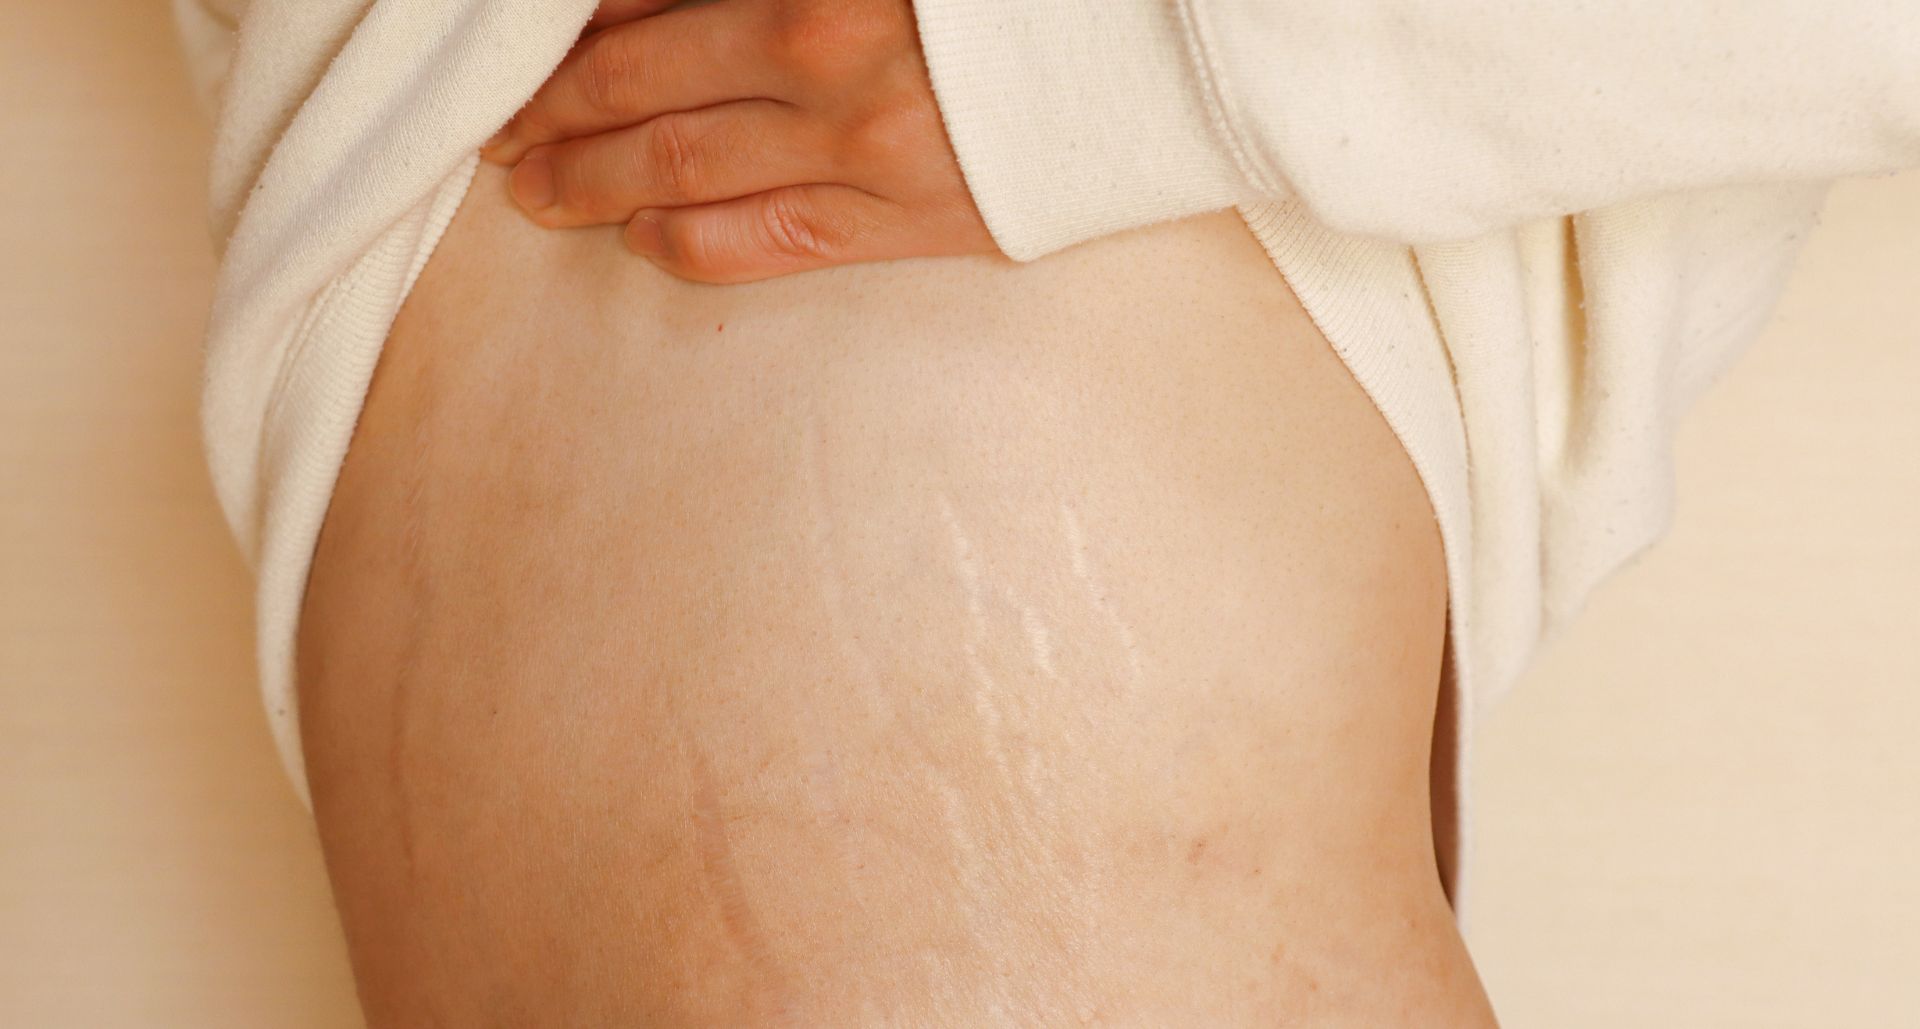 Stretch Marks: What is the best treatment for old stretch marks?